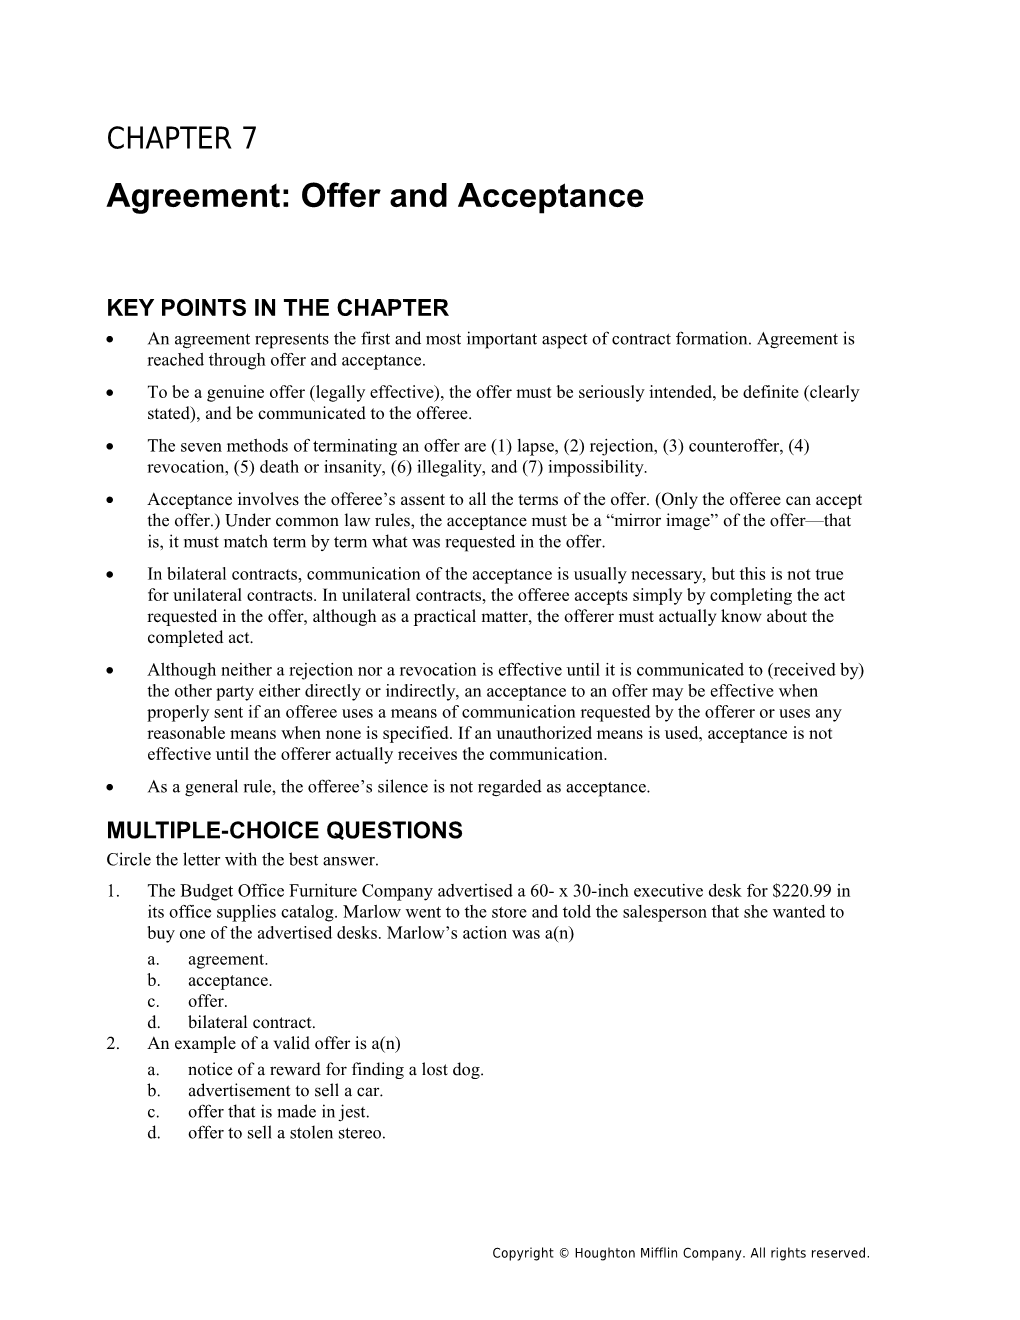 Chapter 7: Agreement: Offer and Acceptance 49